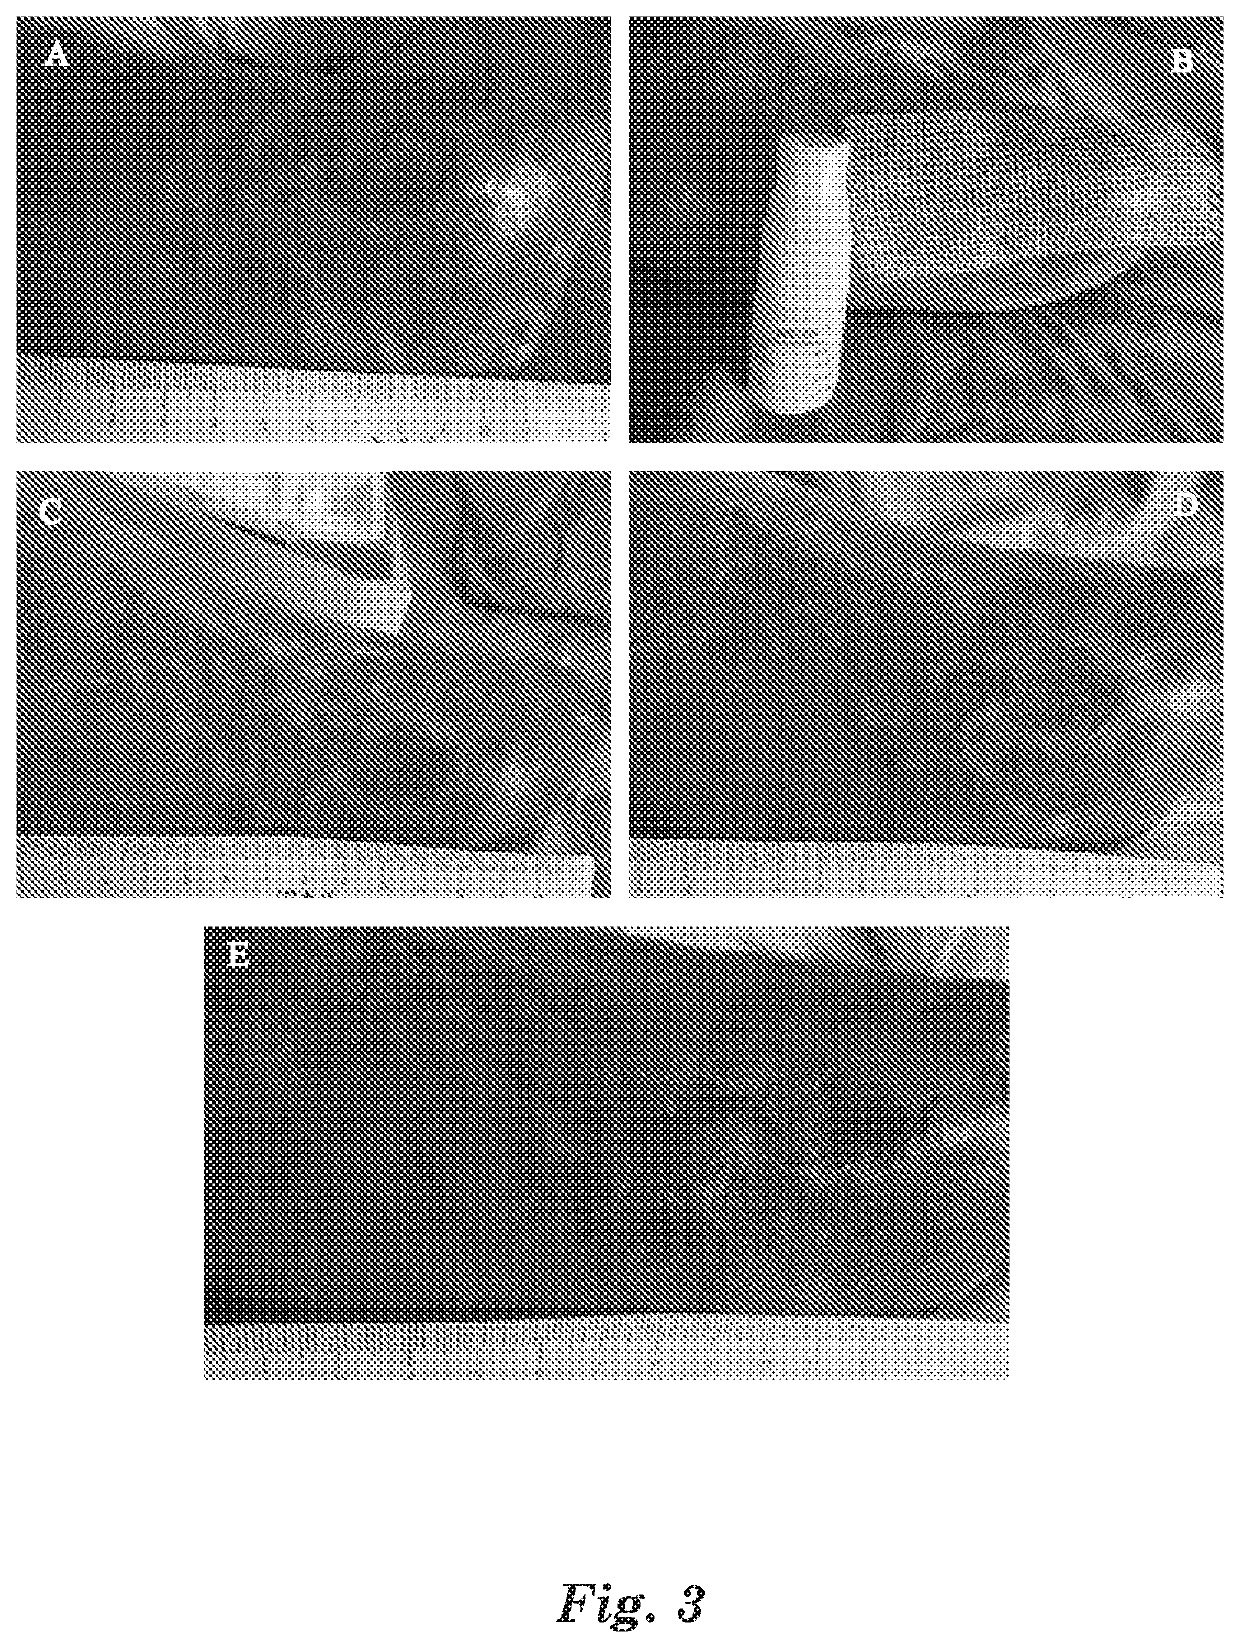 Mussel adhesive protein product and applications thereof in suppression of skin inflammations